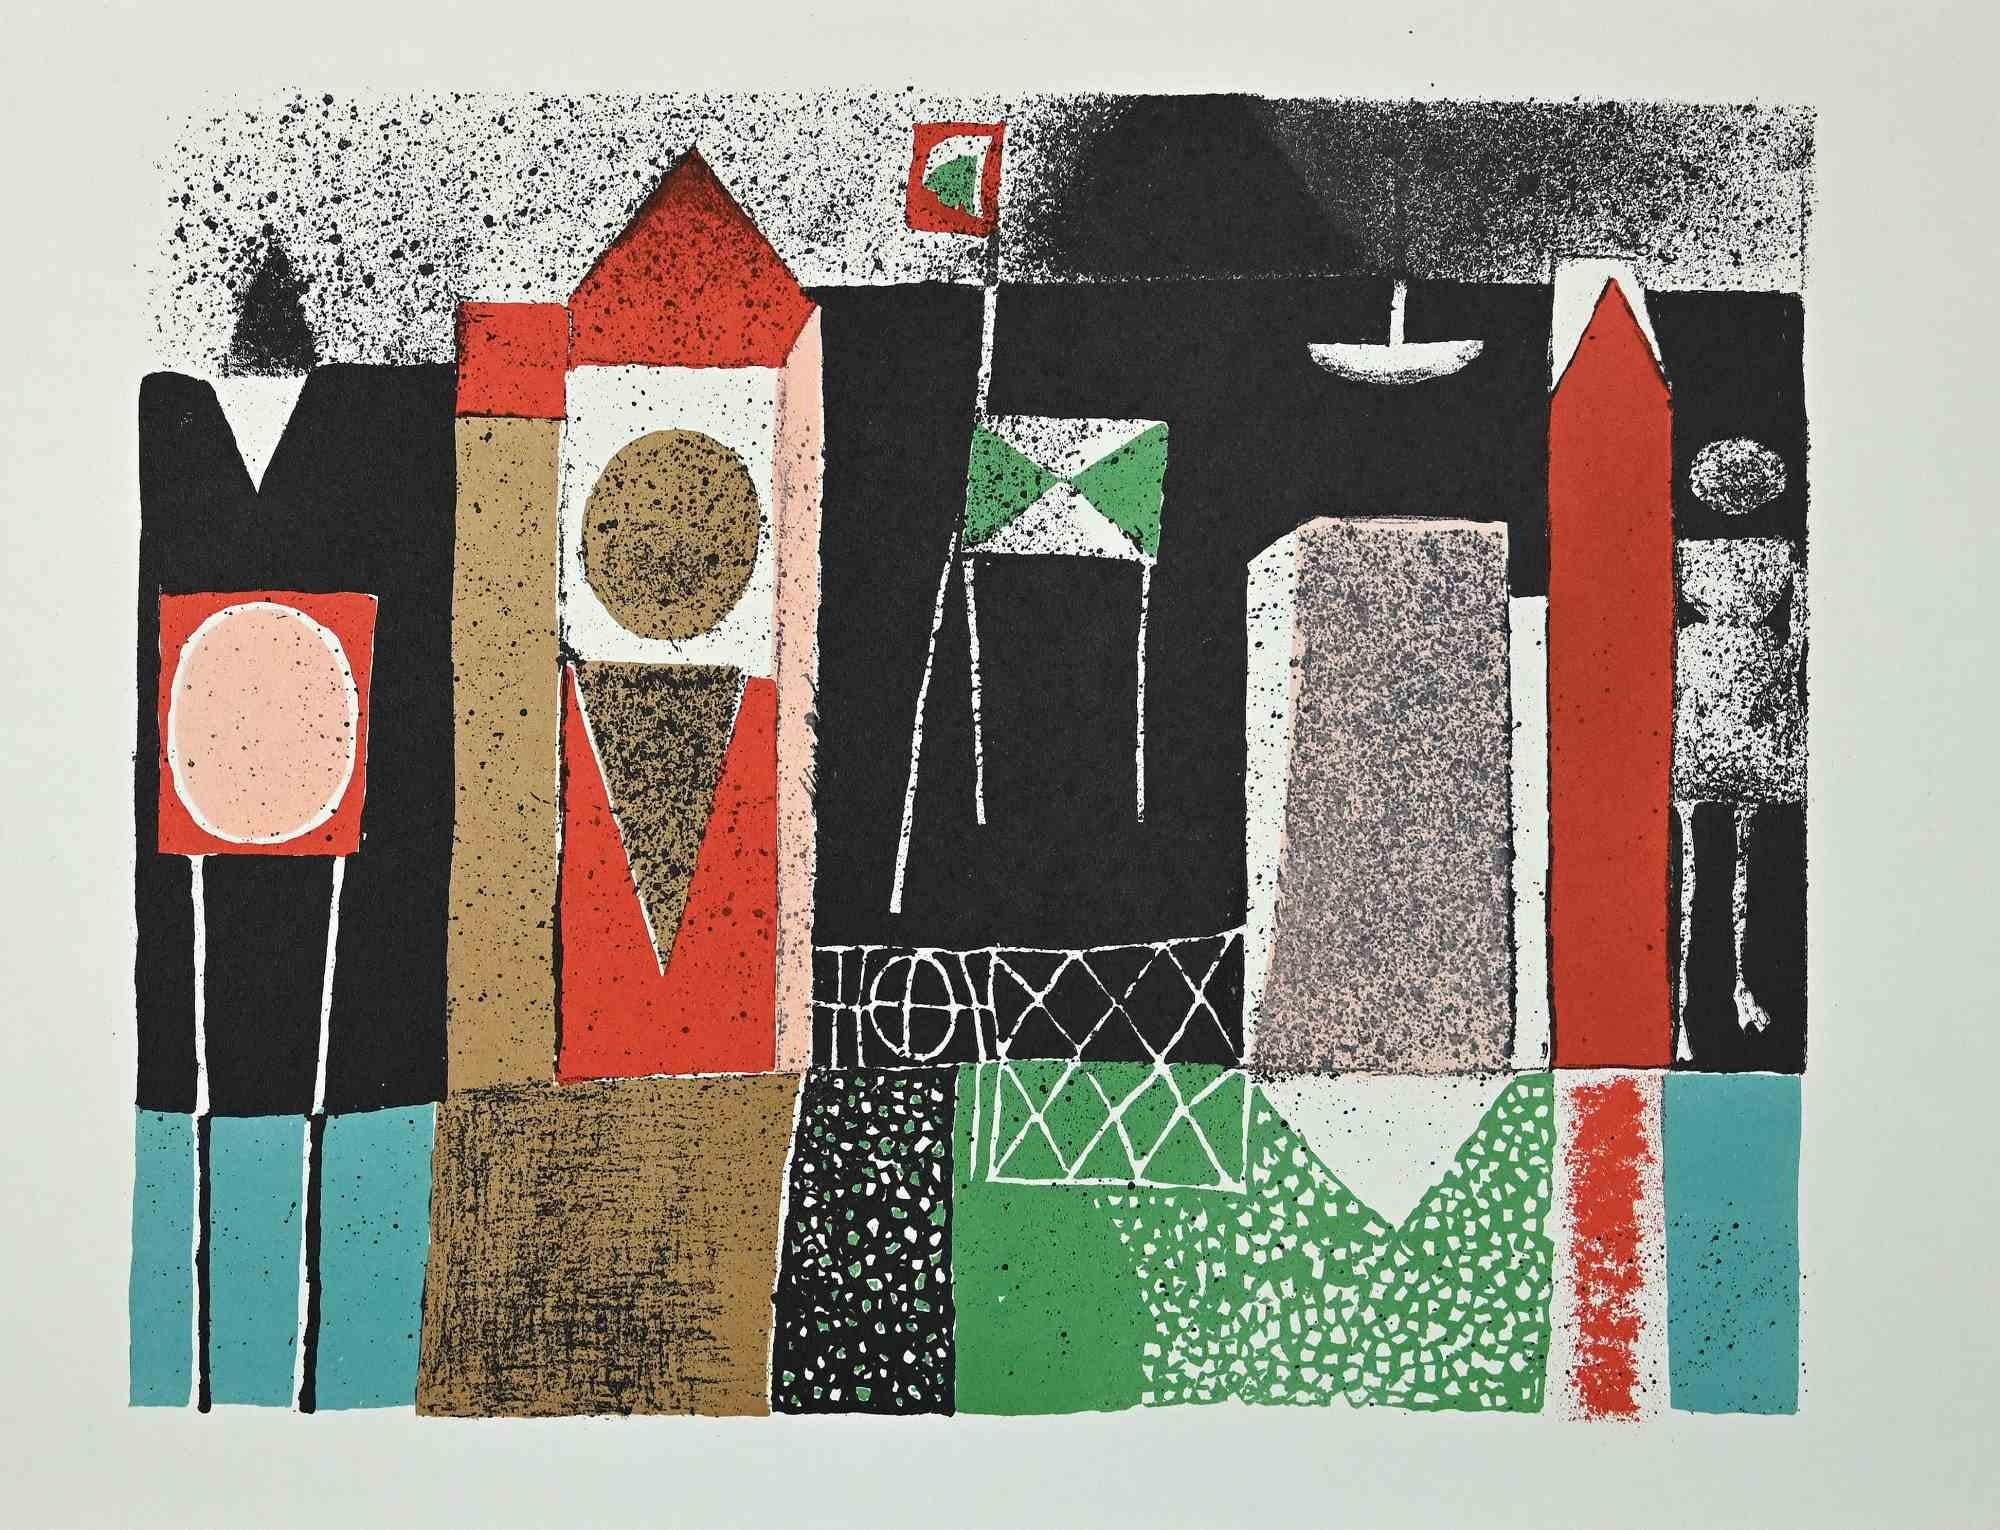 Abstract Composition is a Vintage Offset Print on ivory-colored paper, realized by Franco Gentilini ( Italian Painter, 1909-1981) in the 1970s.

The state of preservation of the artwork is excellent.

Franco Gentilini ( Italian Painter, 1909-1981):